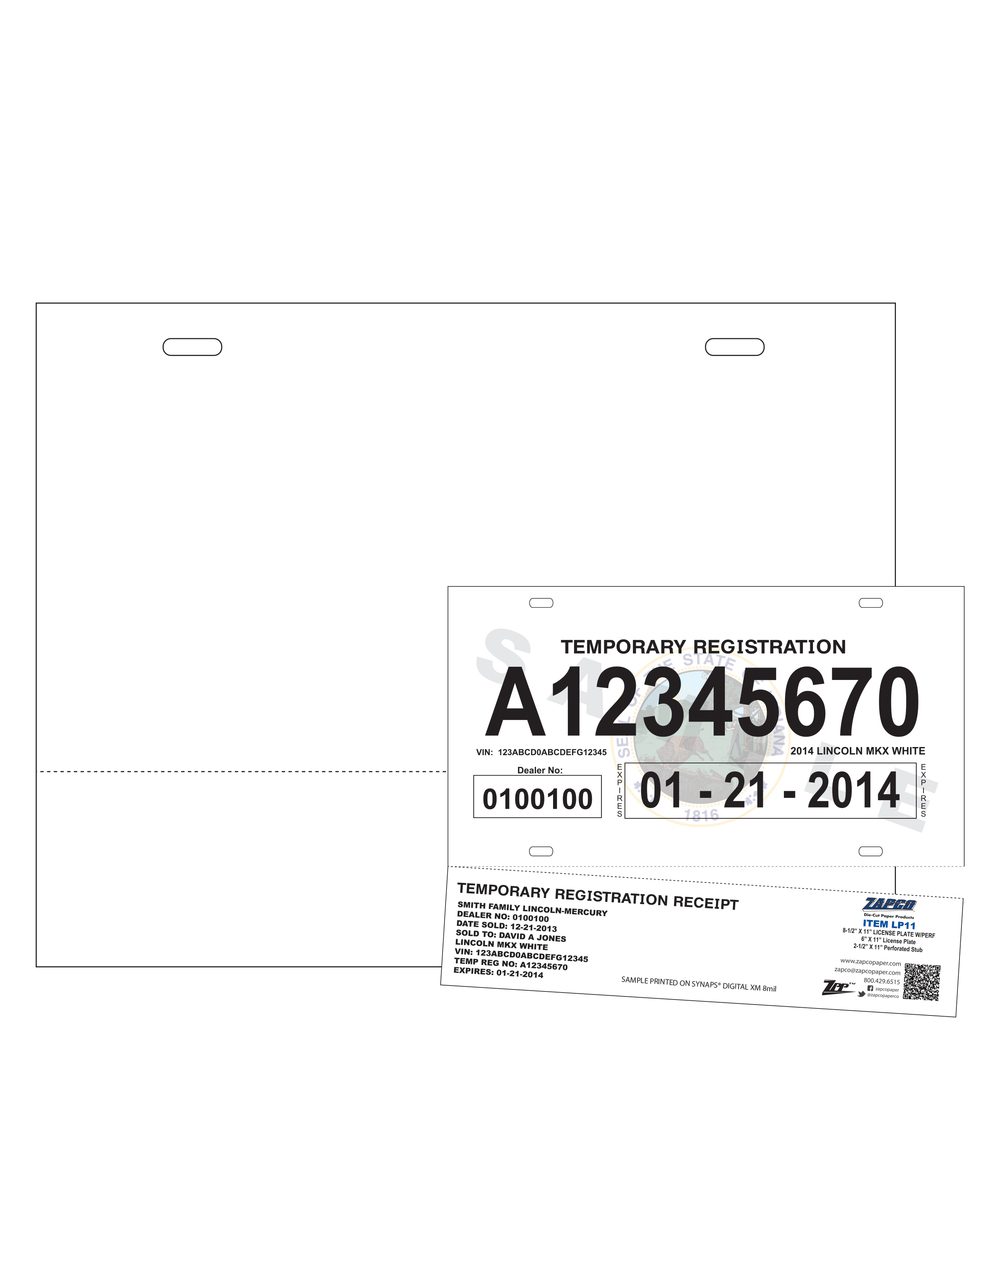 Item NTW- LP11: 1-Up 6" x 11" License Plate 8 1/2" x 11" Sheet(25 Sheets)